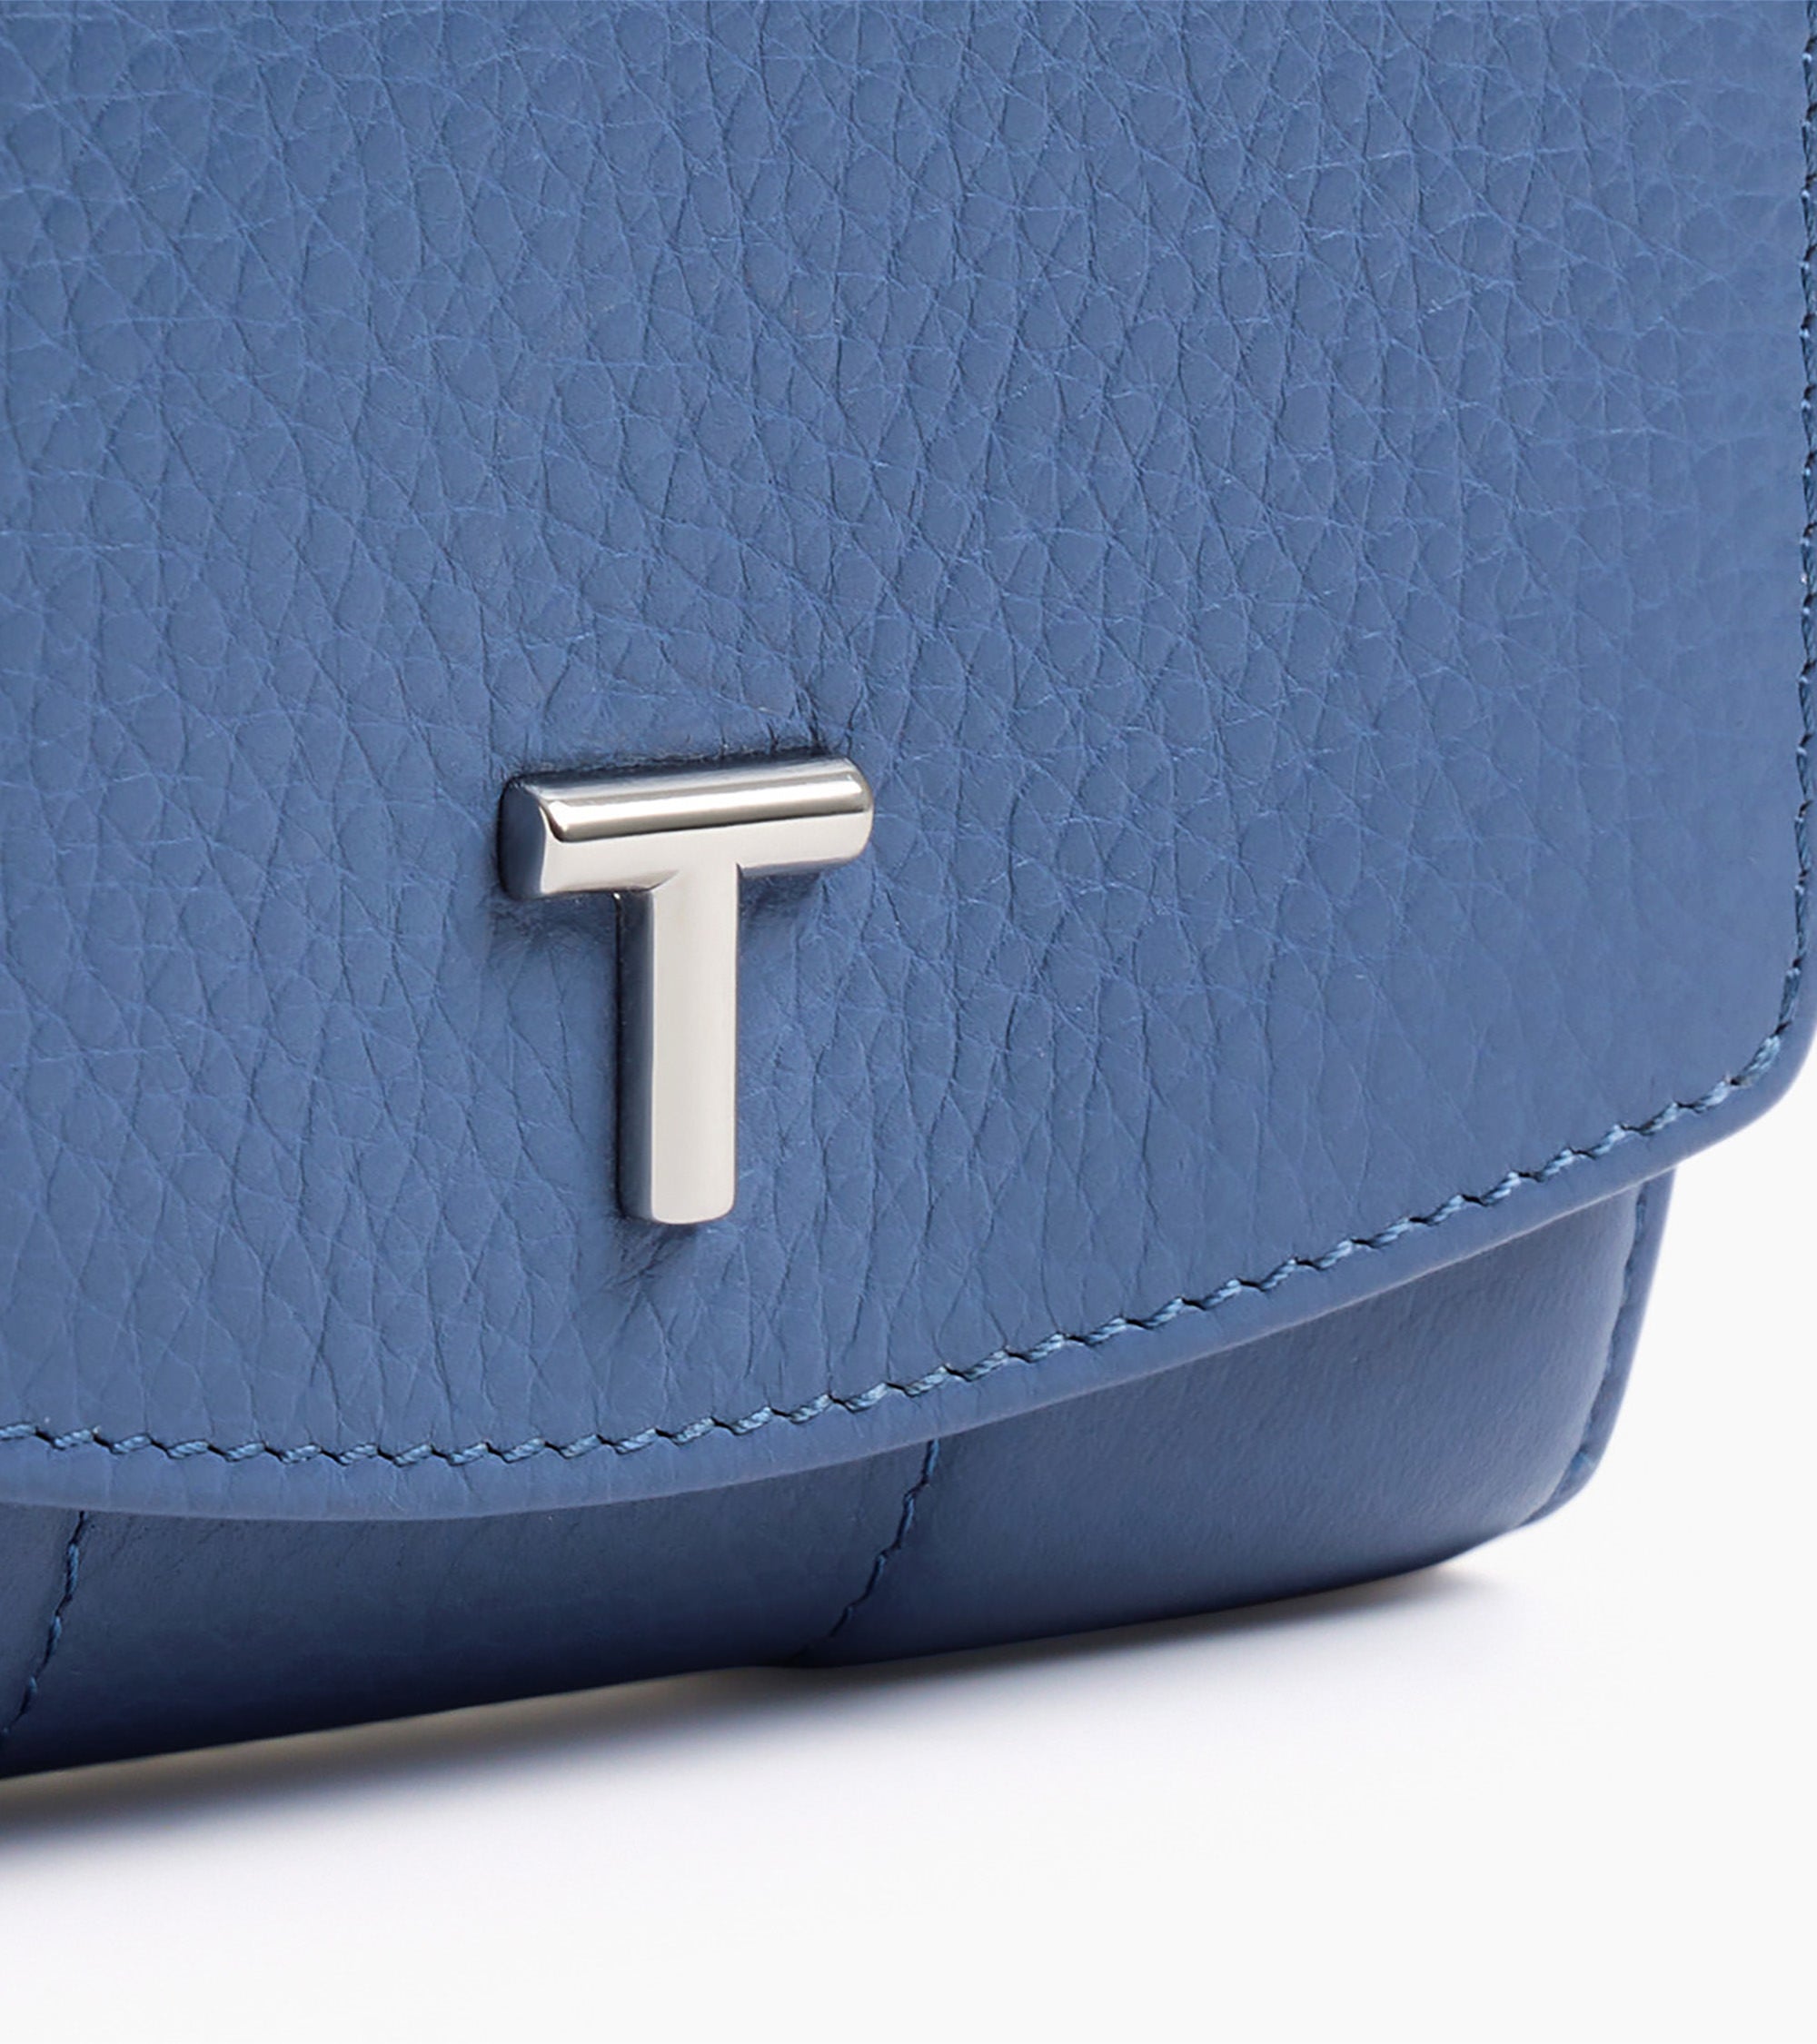 Romy coin case with flap closure in pebbled leather